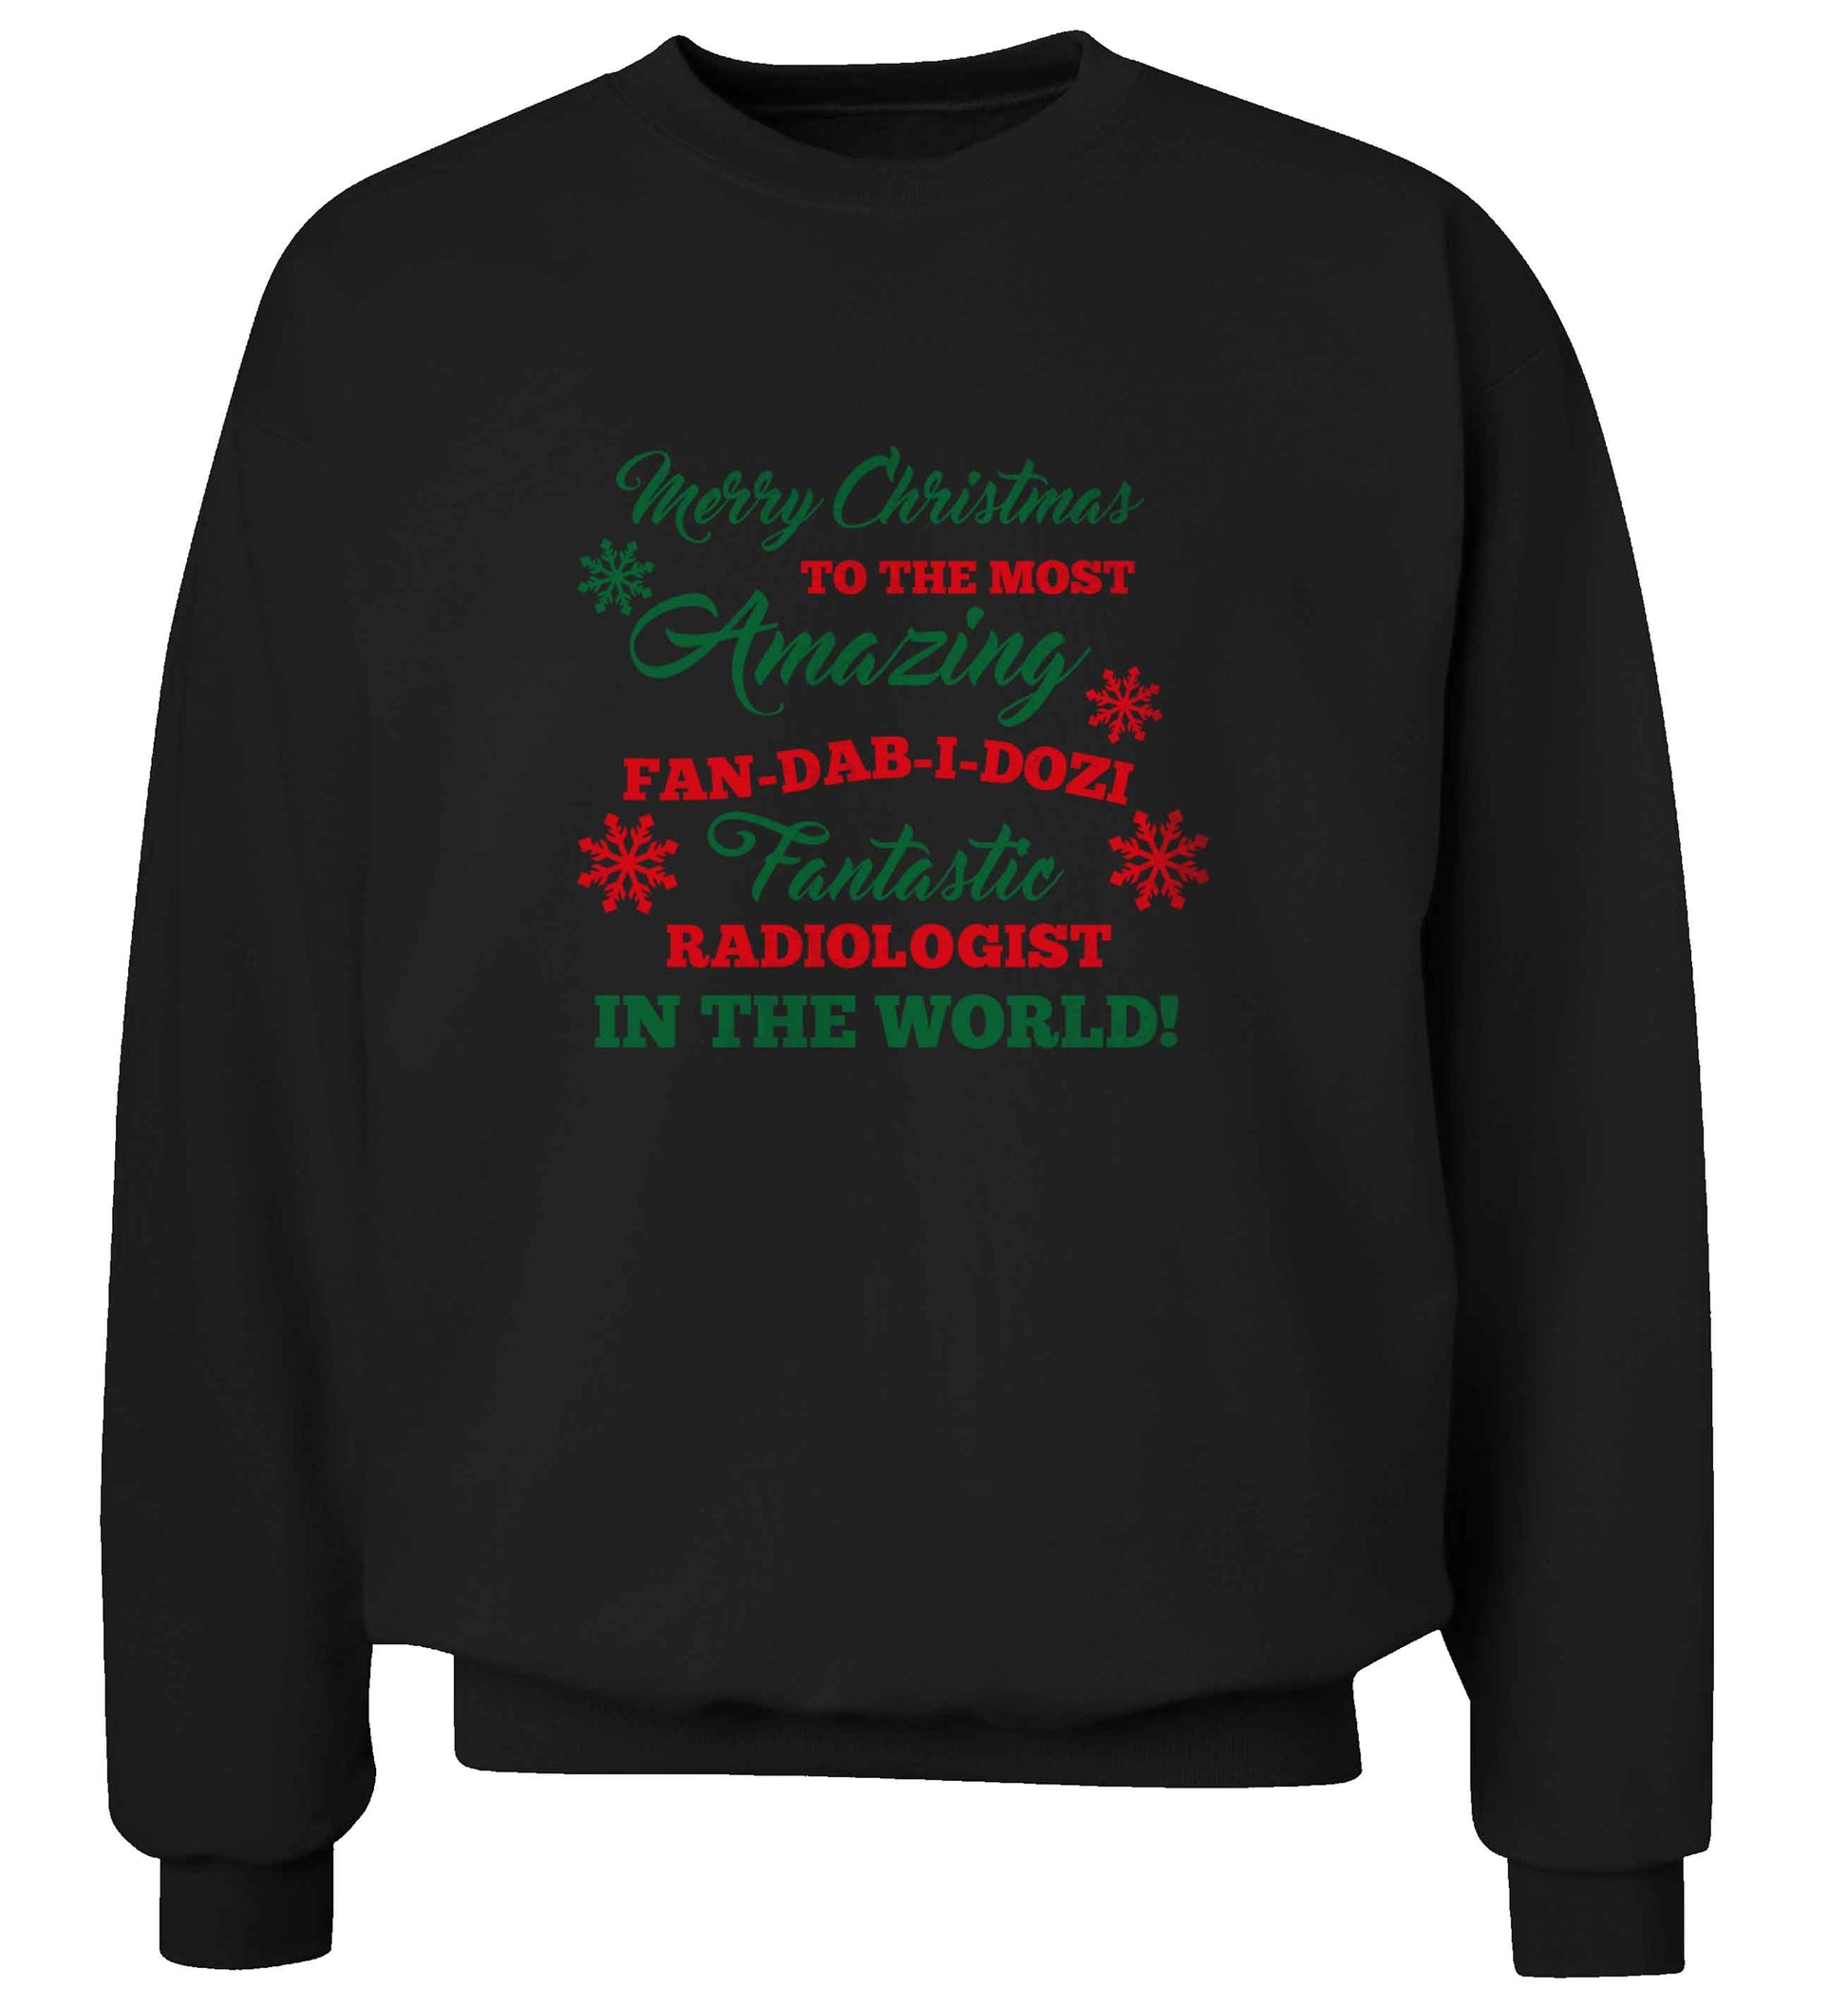 Merry Christmas to the most amazing radiologist in the world! adult's unisex black sweater 2XL